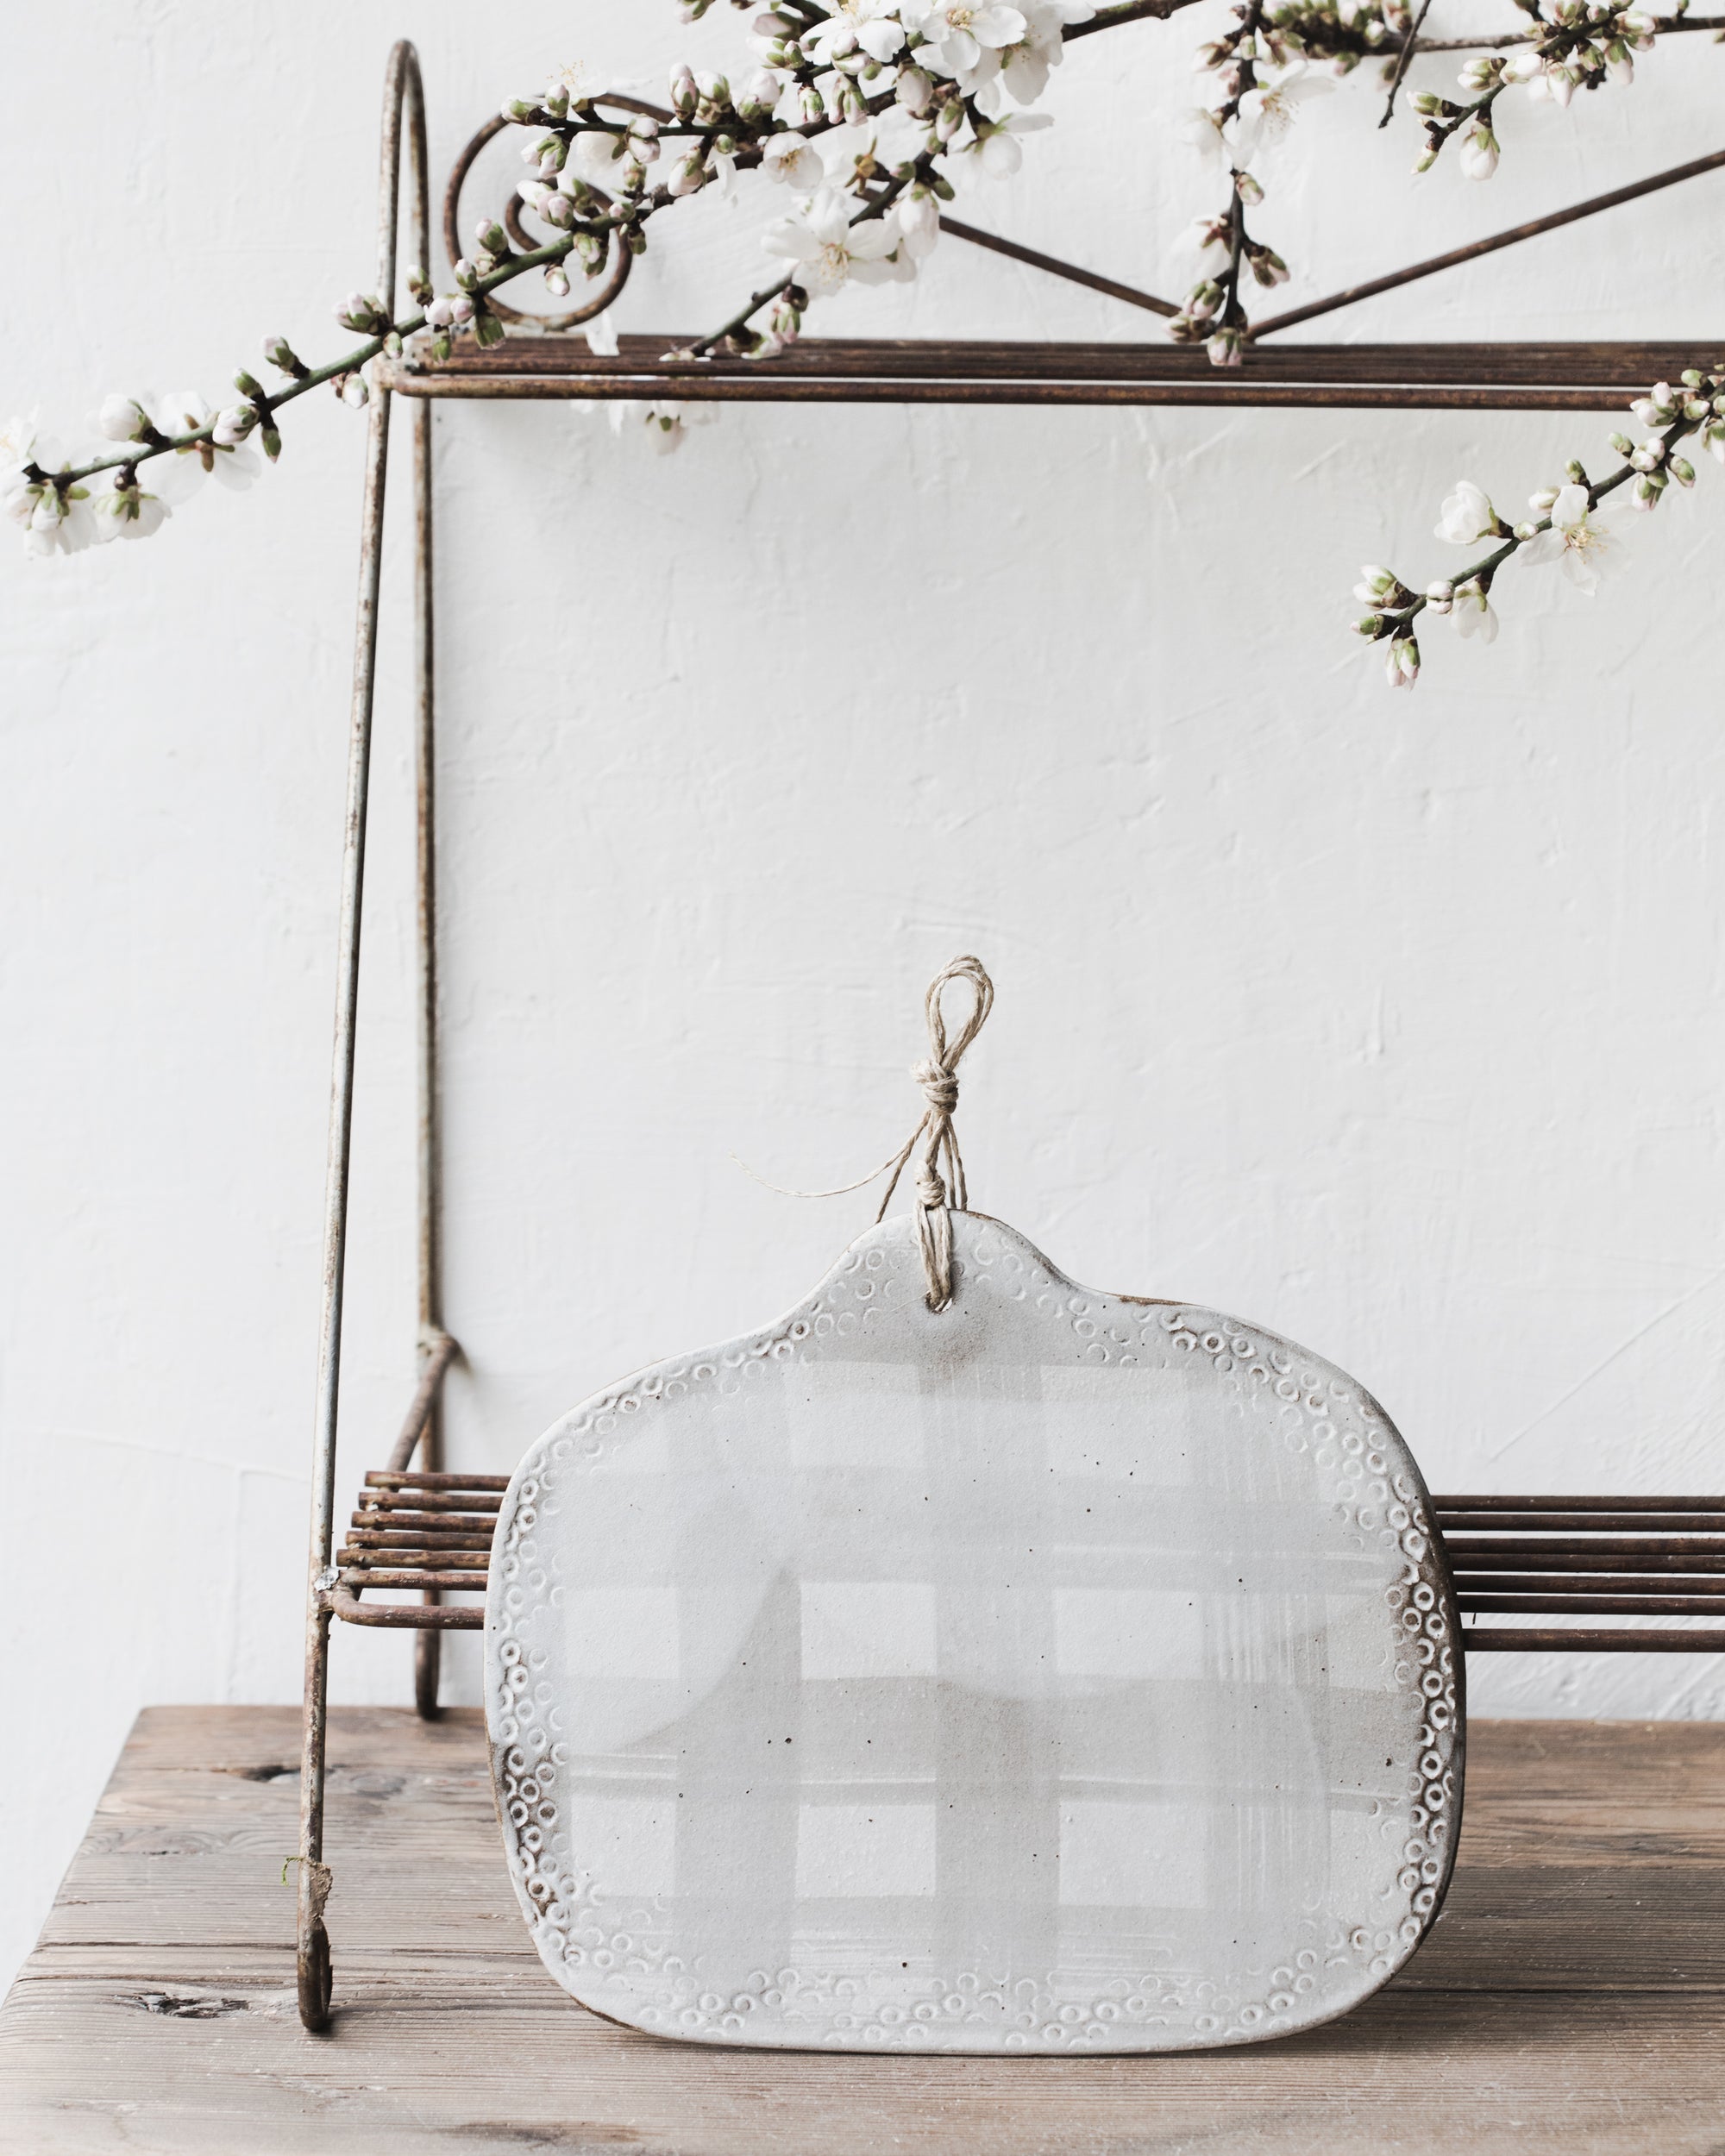 Rustic dark stoneware grid lined platter in grey and white satin with hemp cord handmade by clay beehive ceramics